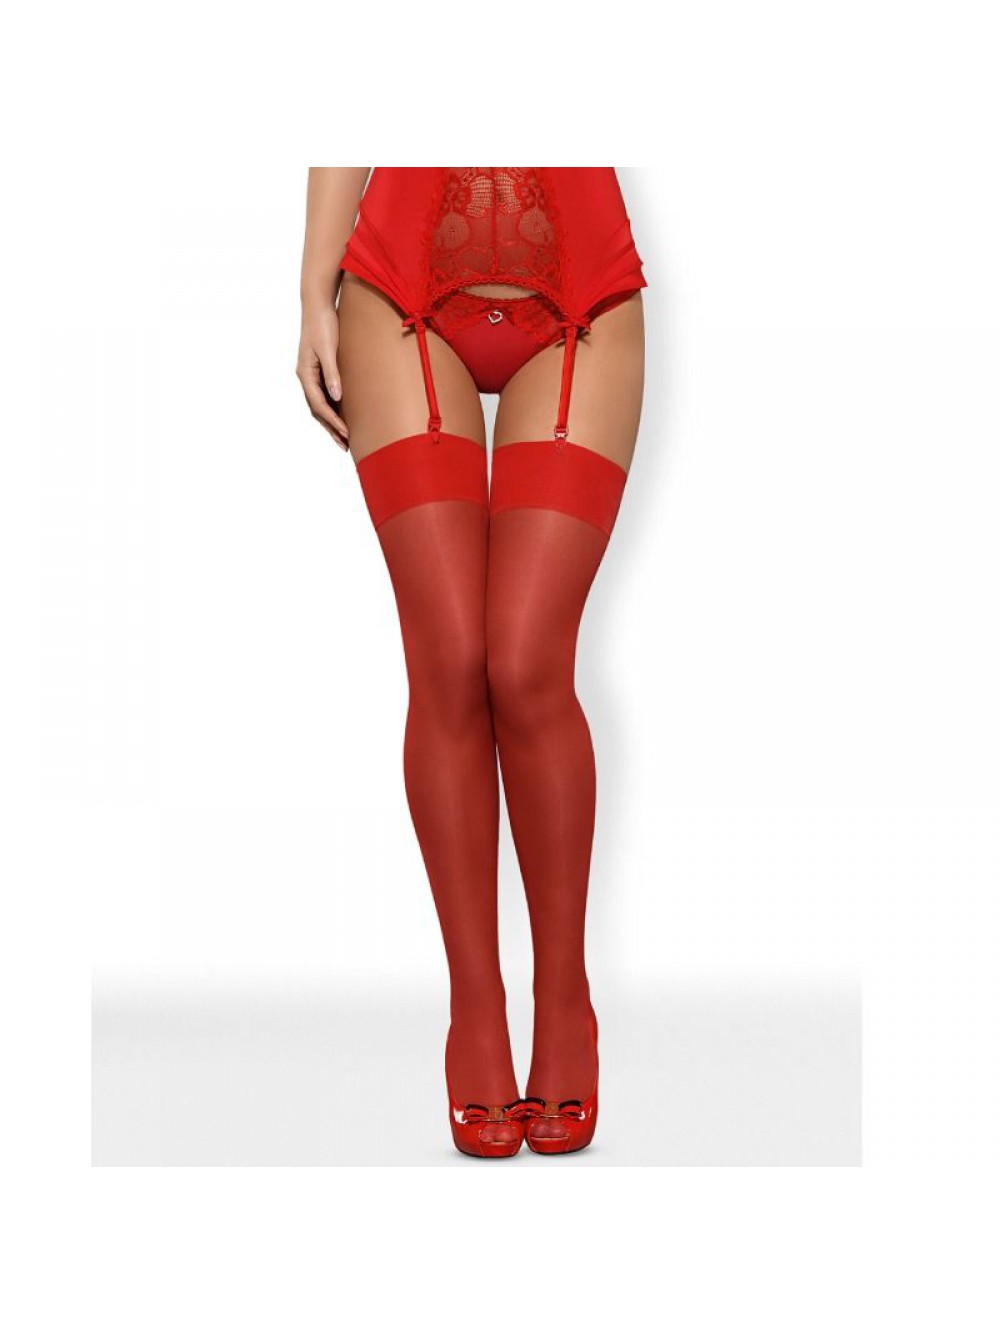 OBSESSIVE STOCKINGS S800 - RED - L/XL 5901688211489